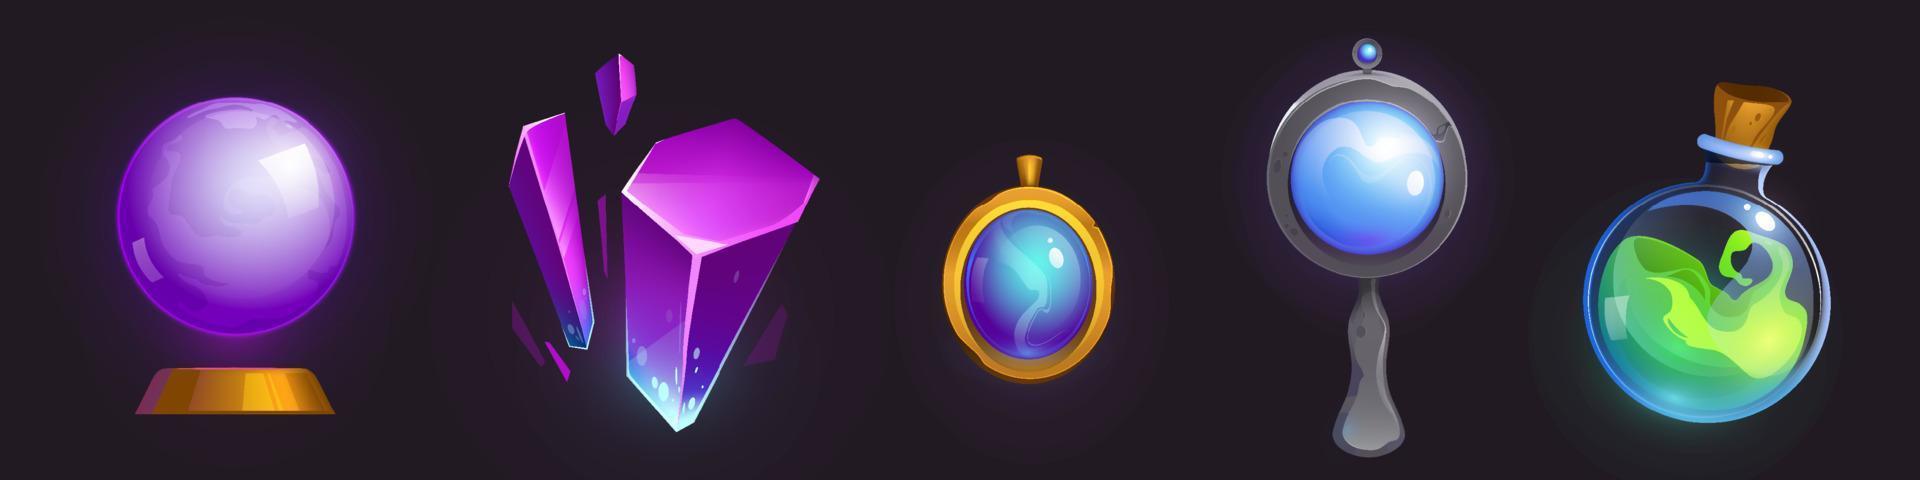 Magic amulet, crystal, mirror, sphere and potion vector